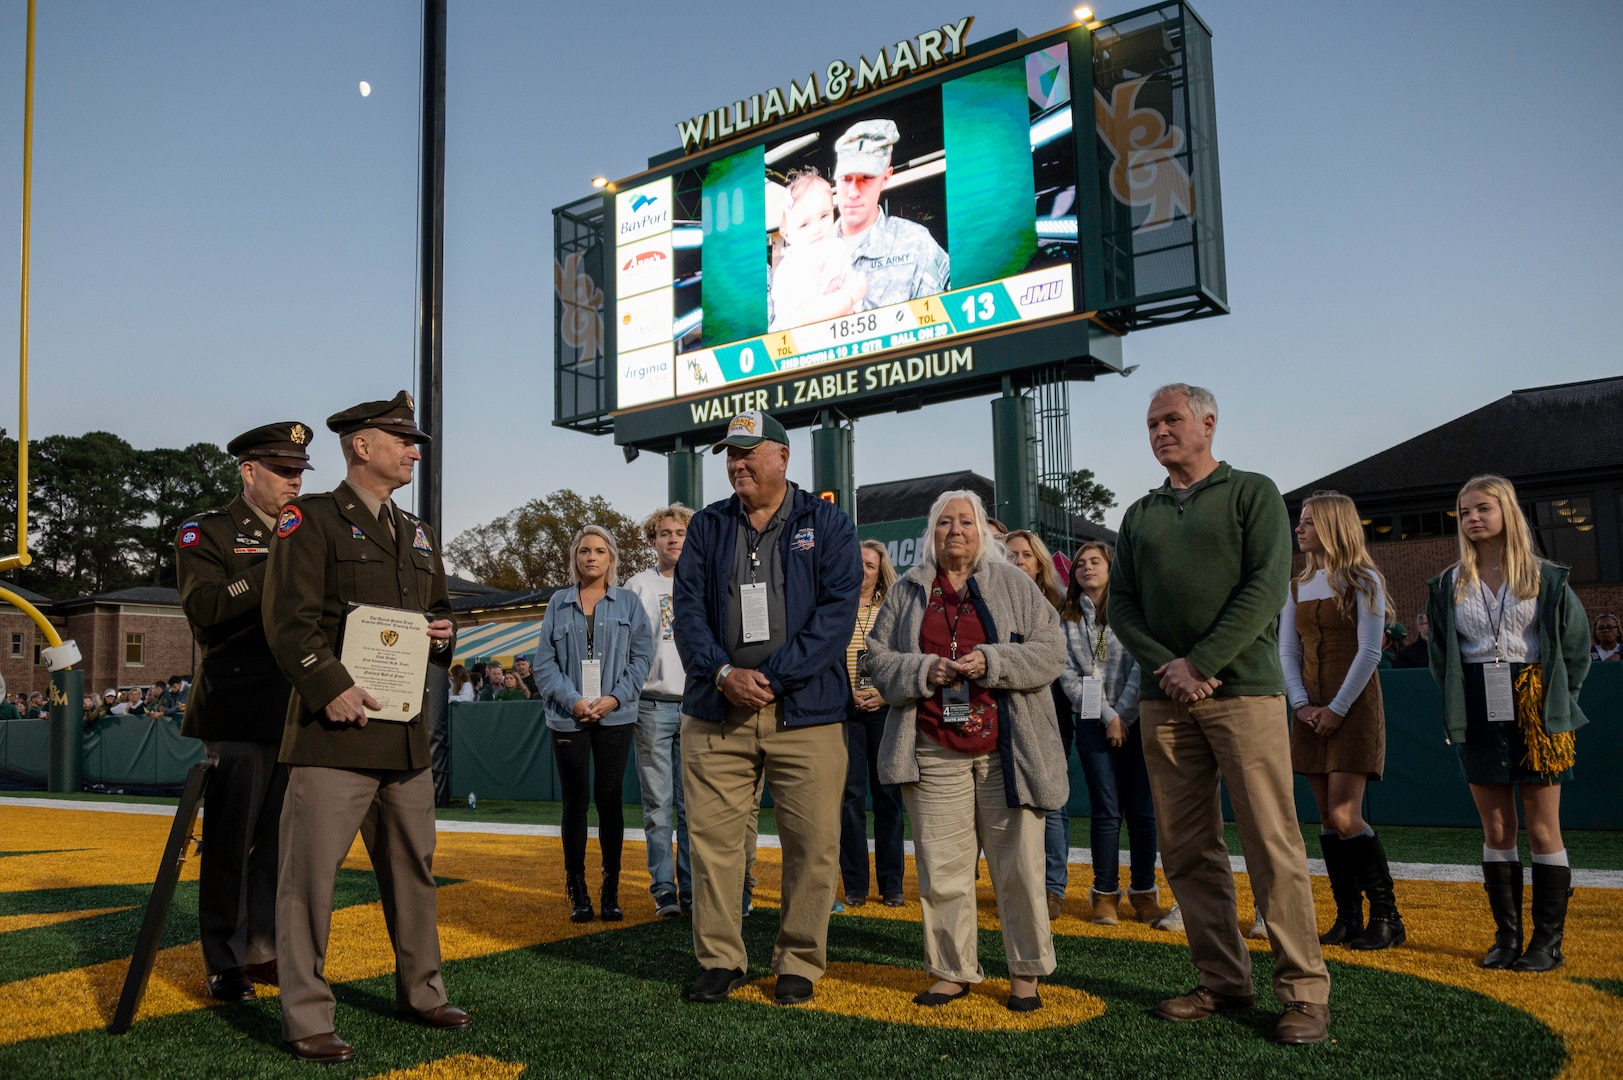 First Lt. Todd W. Weaver is inducted into the Army ROTC Hall of Fame during a military appreciation football game Nov. 13, 2021, at the College of William and Mary. Weaver started his military career in the Virginia National Guard before transitioning to active duty and was killed in action during a night ambush operation in Afghanistan Sept. 9, 2010. Brig. Gen. James W. Ring, Director of the Joint Staff for the Virginia National Guard, presided over the induction ceremony and recognized Weaver’s family on the field. Virginia National Guard cannon crews assigned to the Hanover-based Alpha Battery, 1st Battalion, 111th Field Artillery Regiment, 116th Infantry Brigade Combat Team and UH-60 Black Hawk helicopters assigned to the Sandston-based 2nd Battalion, 224th Aviation Regiment, 29th Infantry Division supported the event with cannon fire and a flyover. (U.S. Army National Guard Photo by Staff Sgt. Lisa M. Sadler)